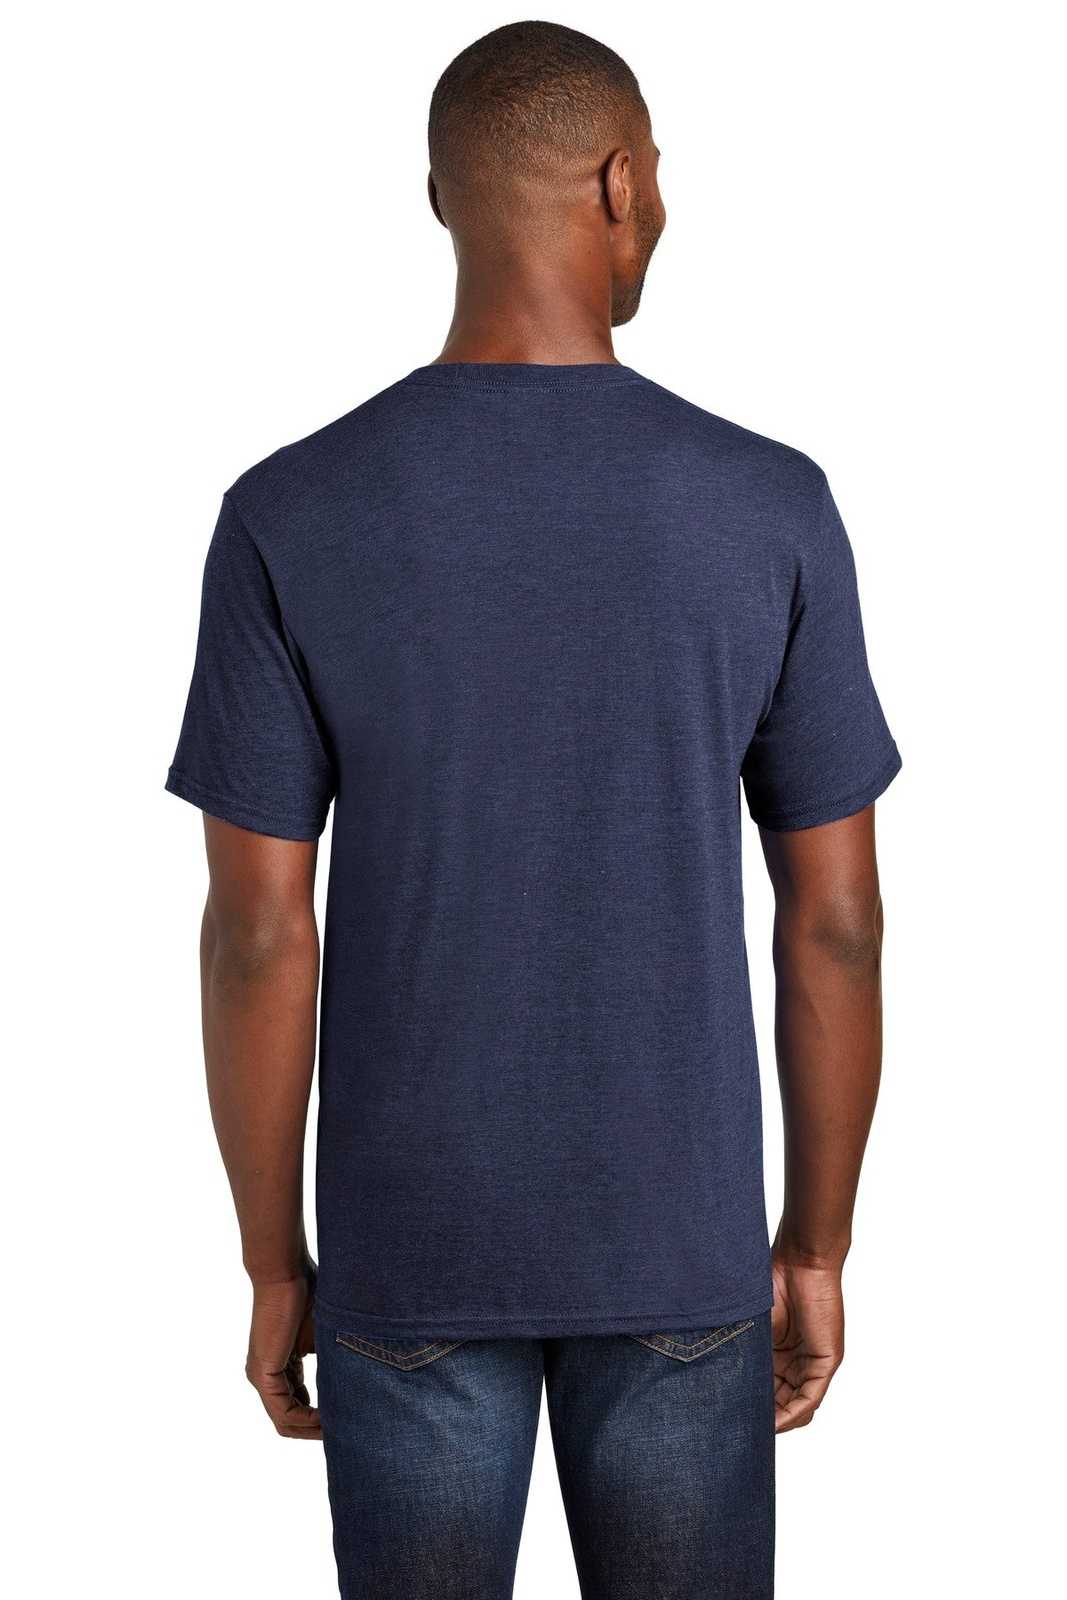 Port &amp; Company PC455 Fan Favorite Blend Tee - Team Navy Heather - HIT a Double - 2